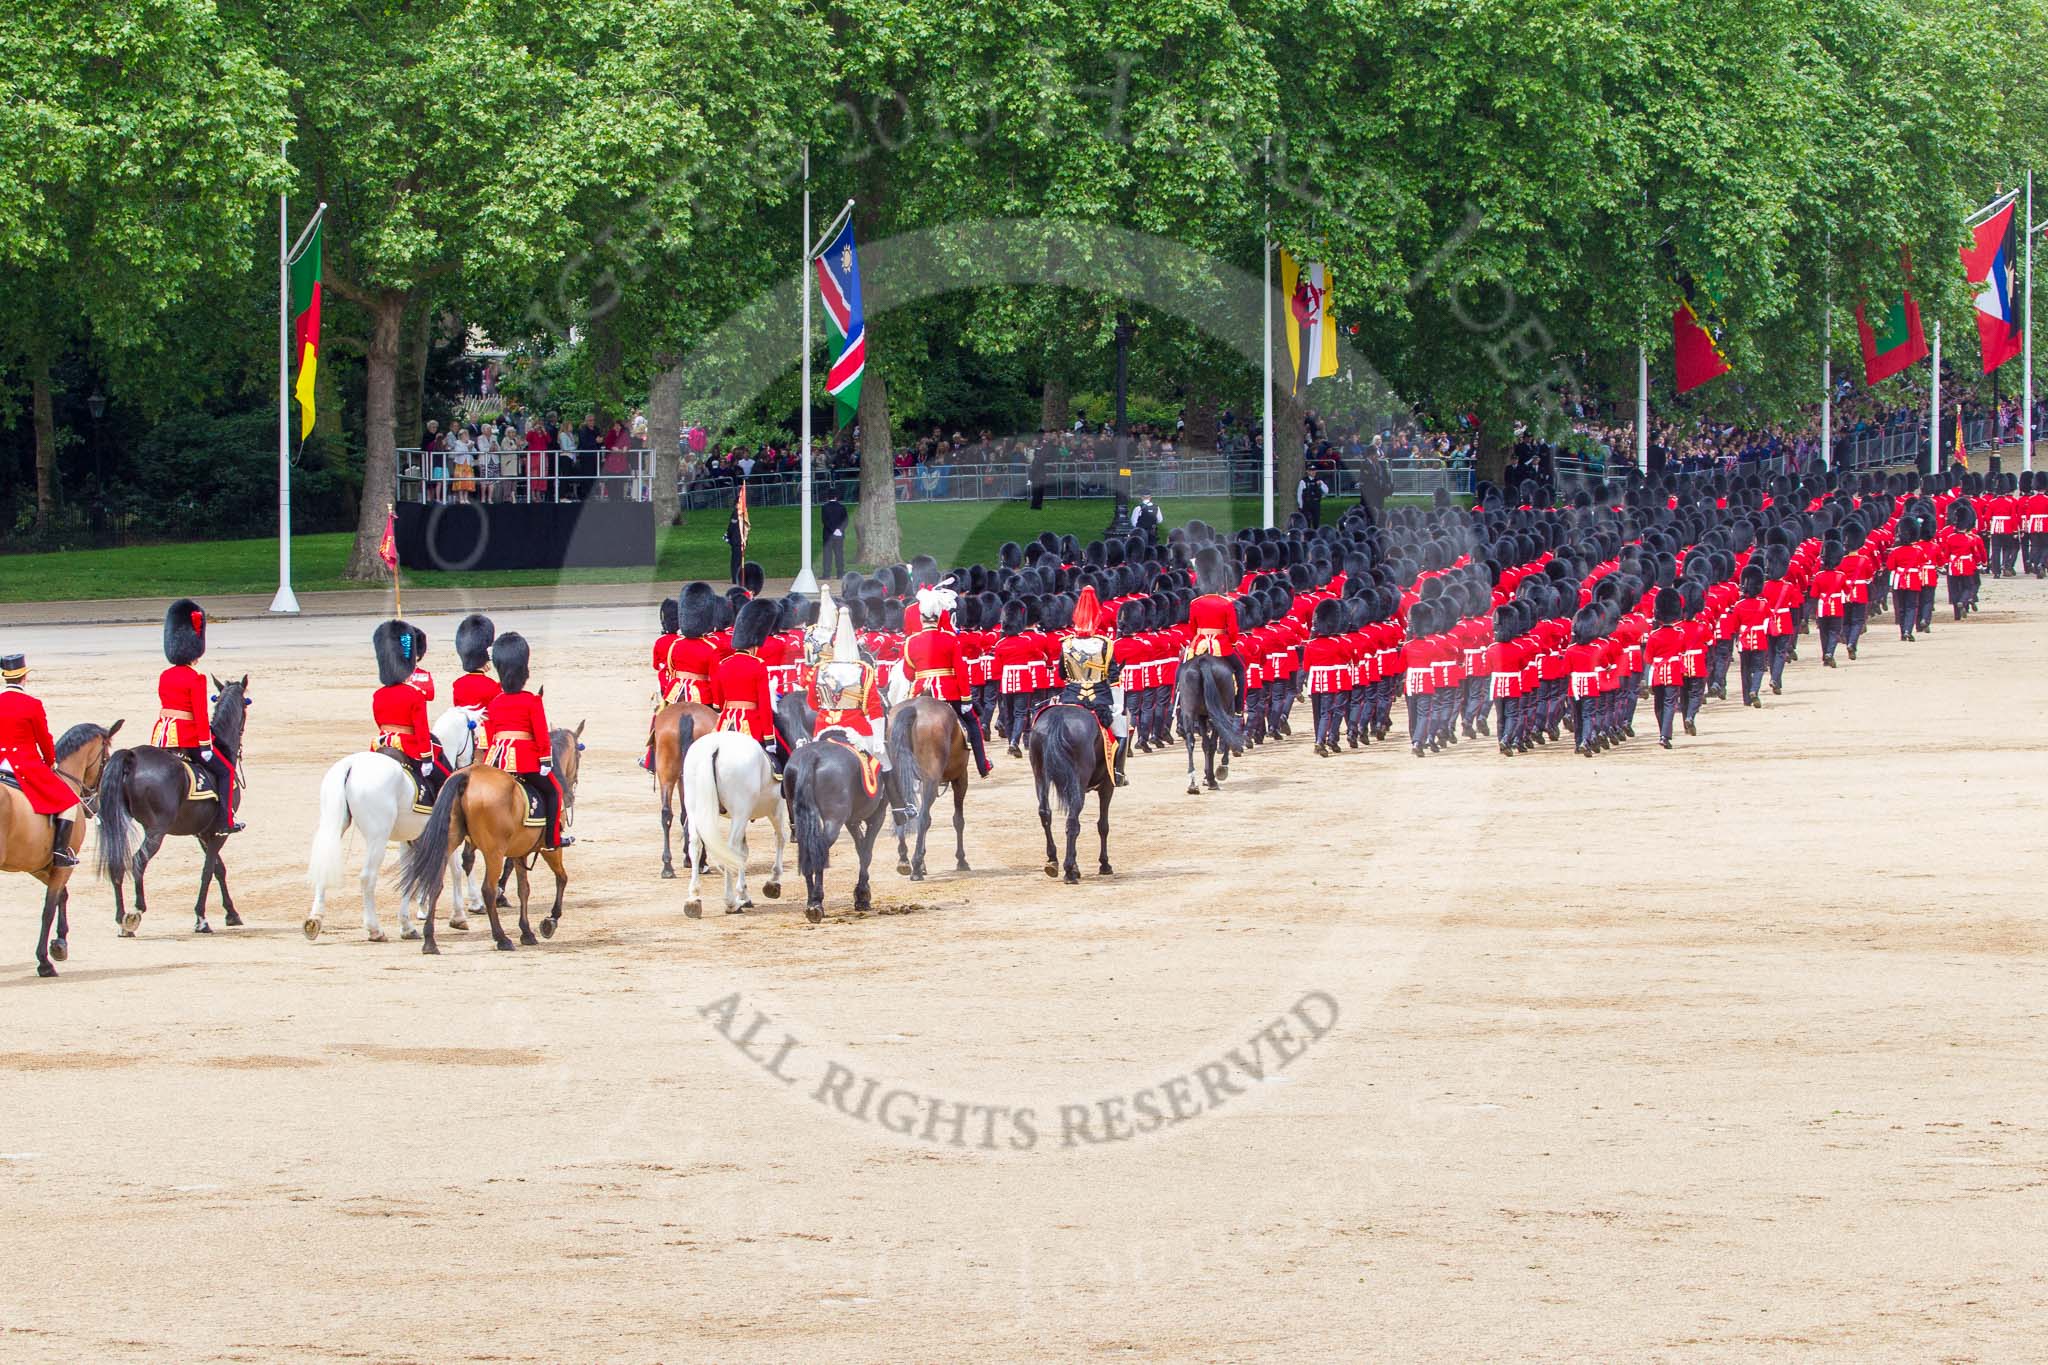 Trooping the Colour 2013: The March Off - the "second half" of the Royal Procession following the guards divisions. Image #863, 15 June 2013 12:13 Horse Guards Parade, London, UK